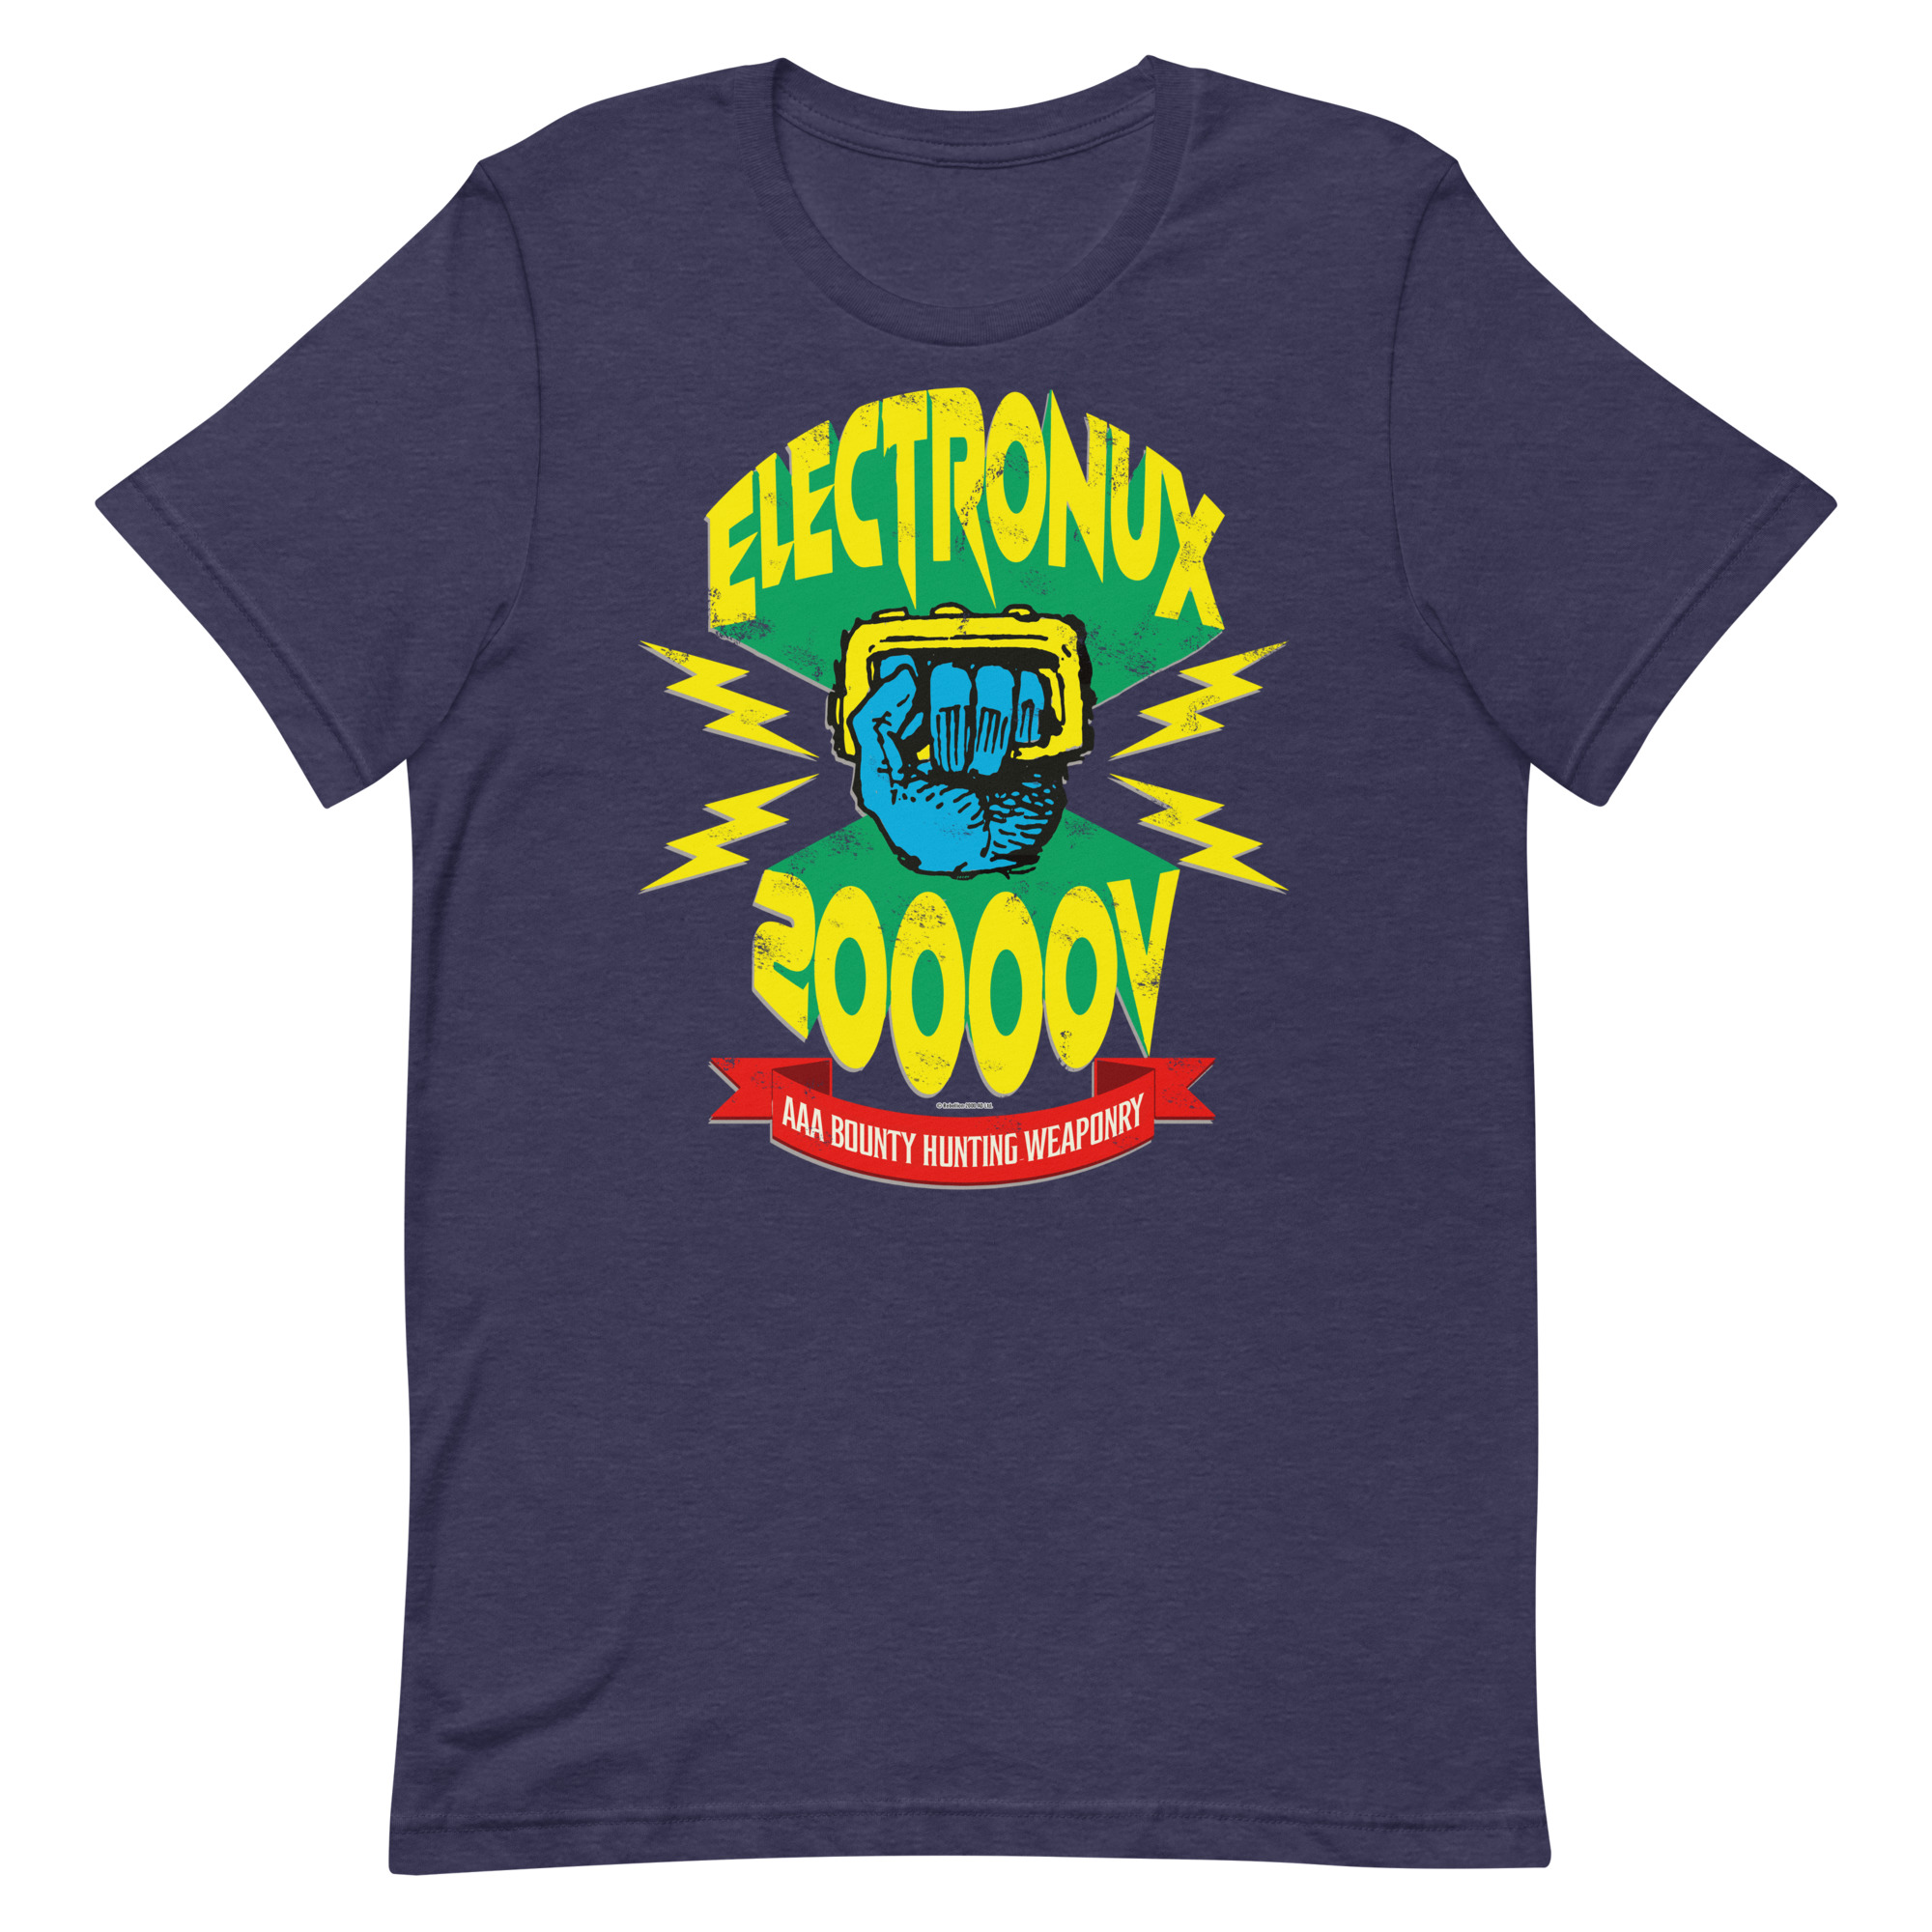 Purple Tshirt with a design of Johnny Alpha's elctroknuckles and the words 